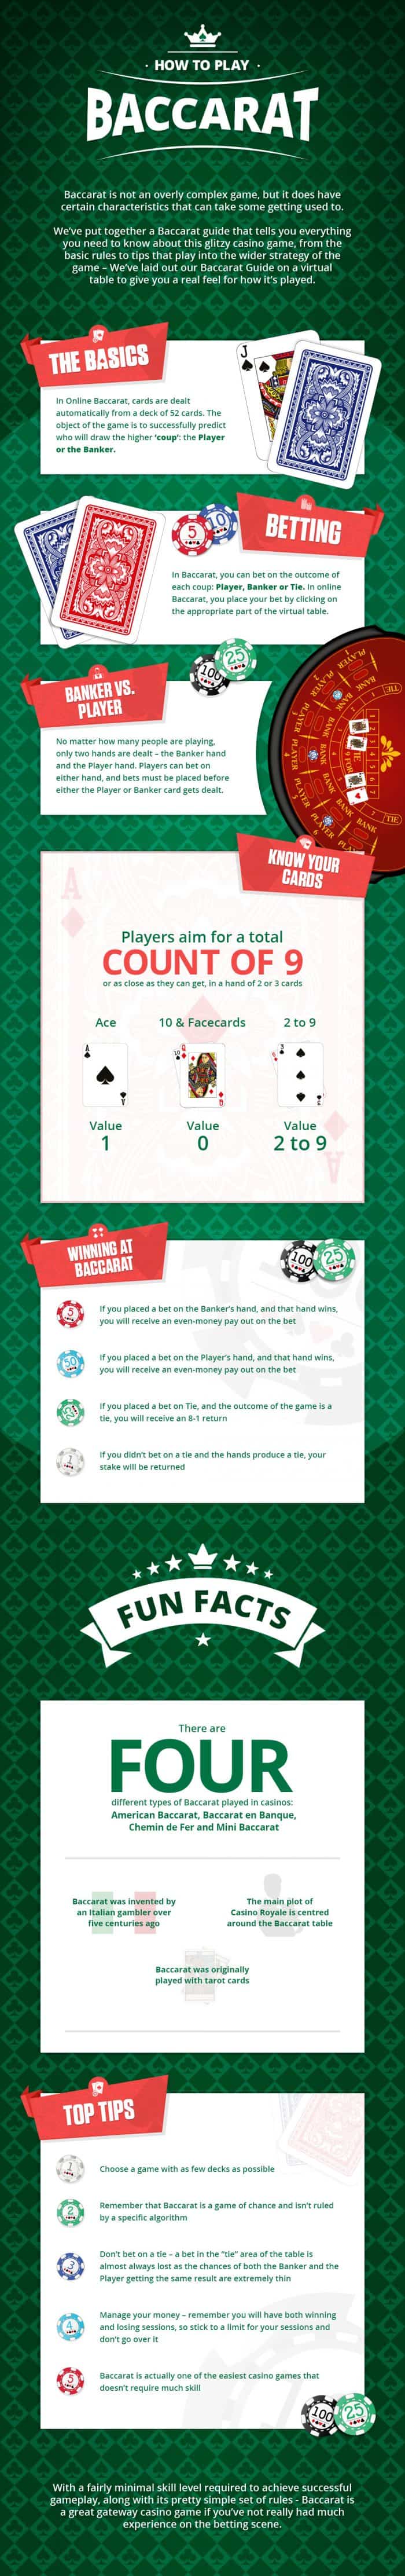 How To Play Baccarat Infographic